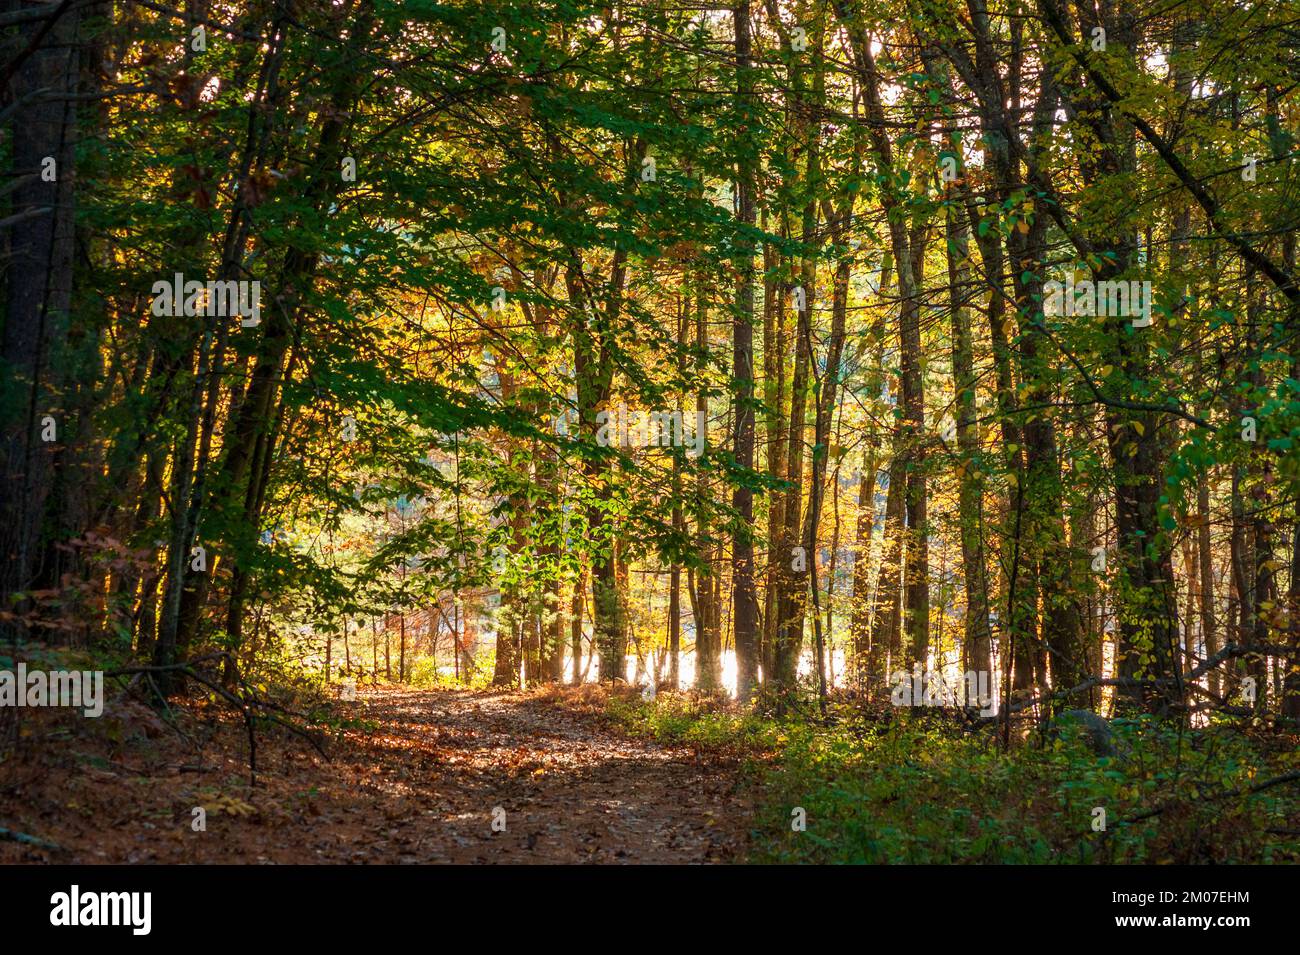 Path through a scenic forest. Beech, maple and oak trees in fall colors. Sun shining through the canopy. Peak foliage in New England. Stock Photo